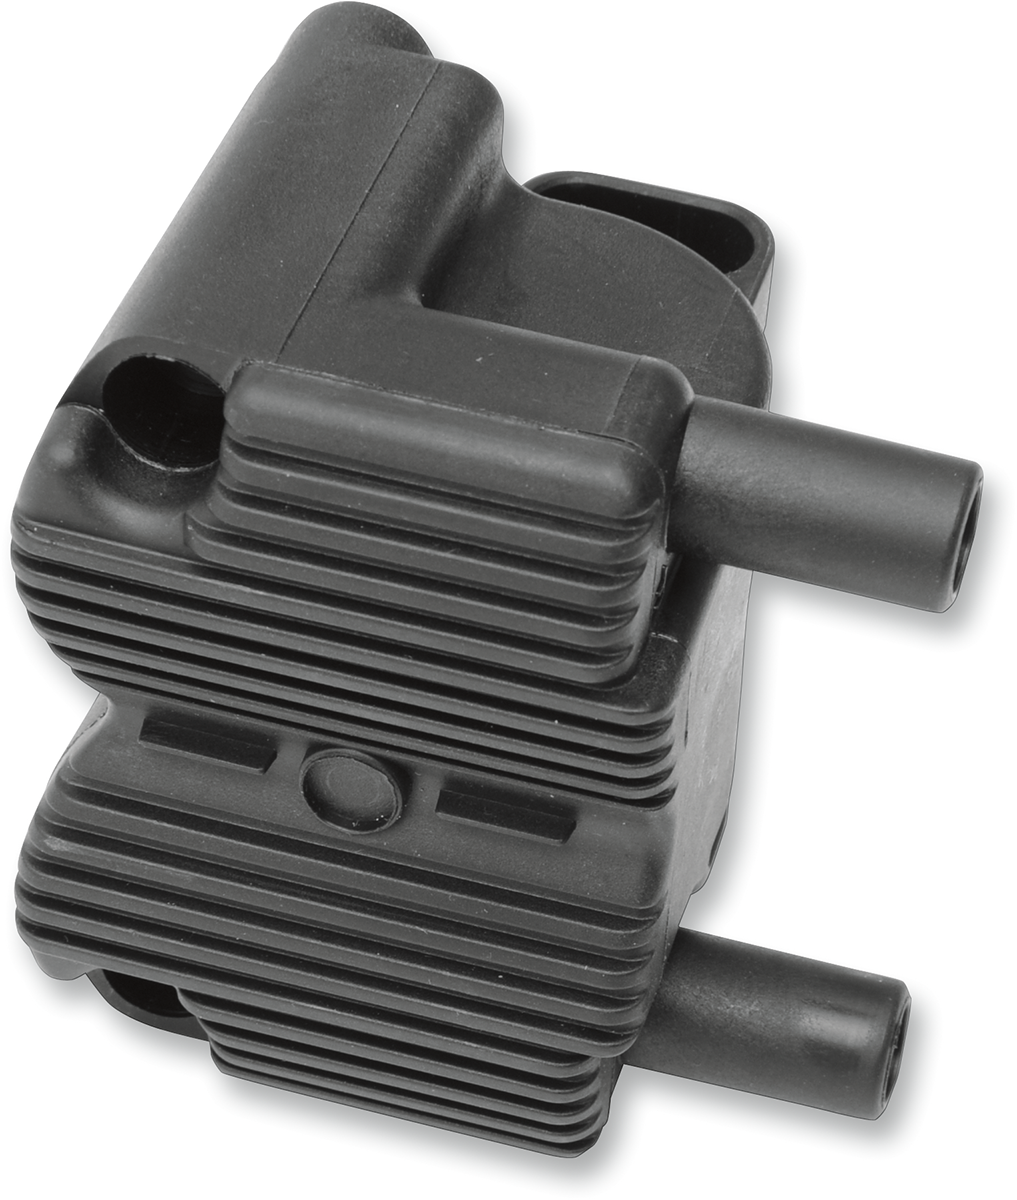 DRAG SPECIALTIES Dual-Fire Ignition Coil - Harley Davidson - Black 10-2003